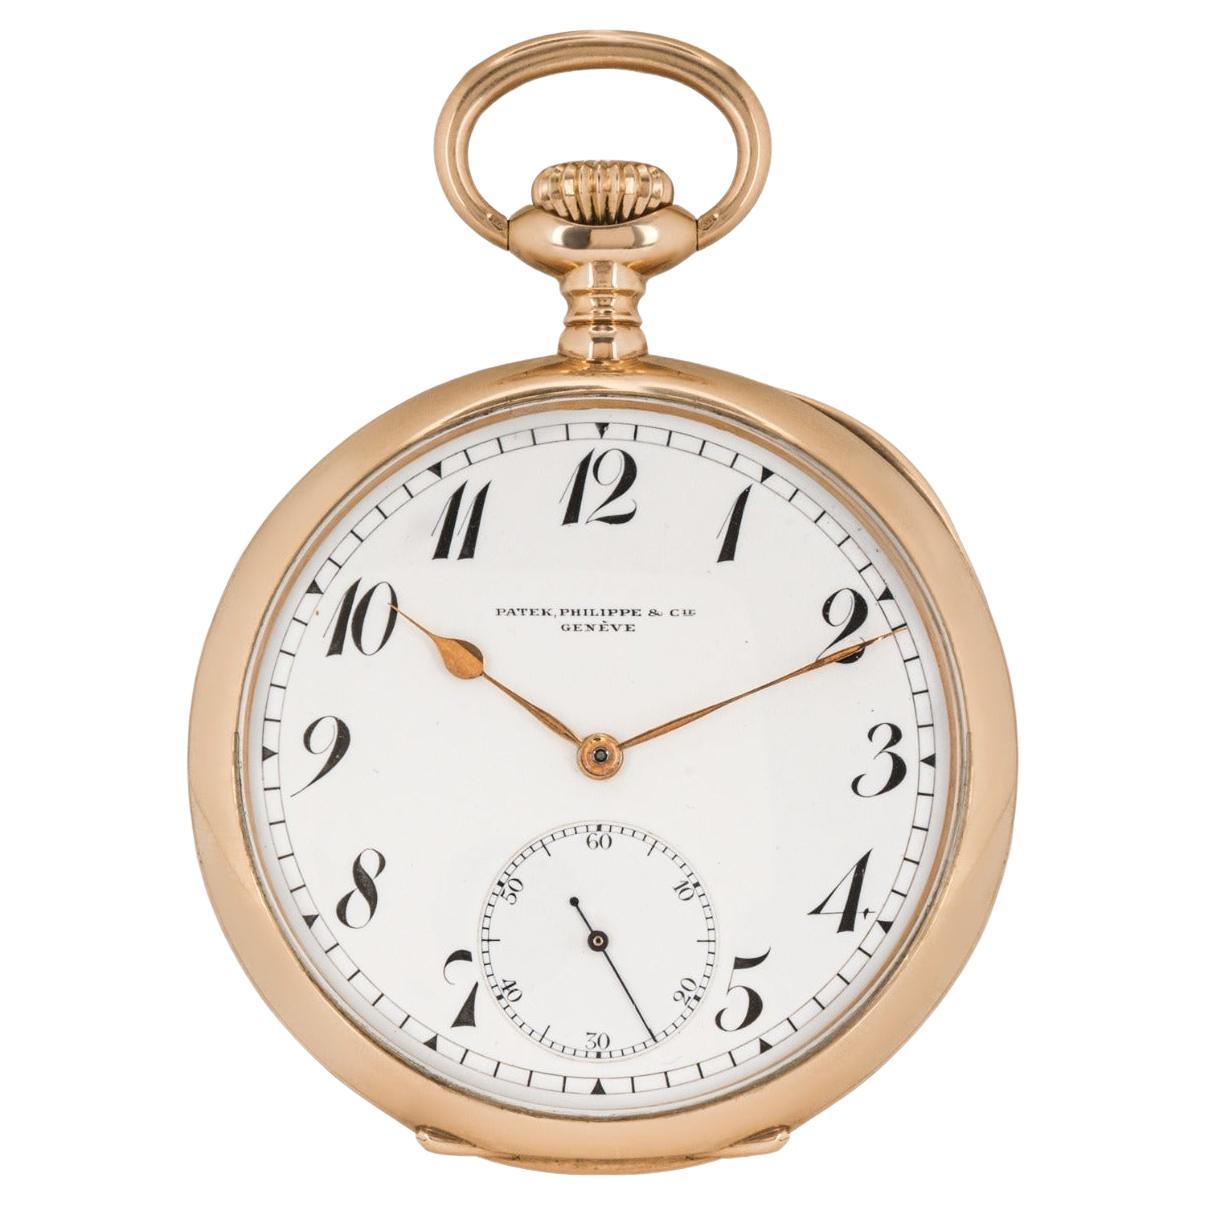 Patek Philippe. A Rare 14CT Rose Gold Keyless Lever Open Face Pocket Watch C1911